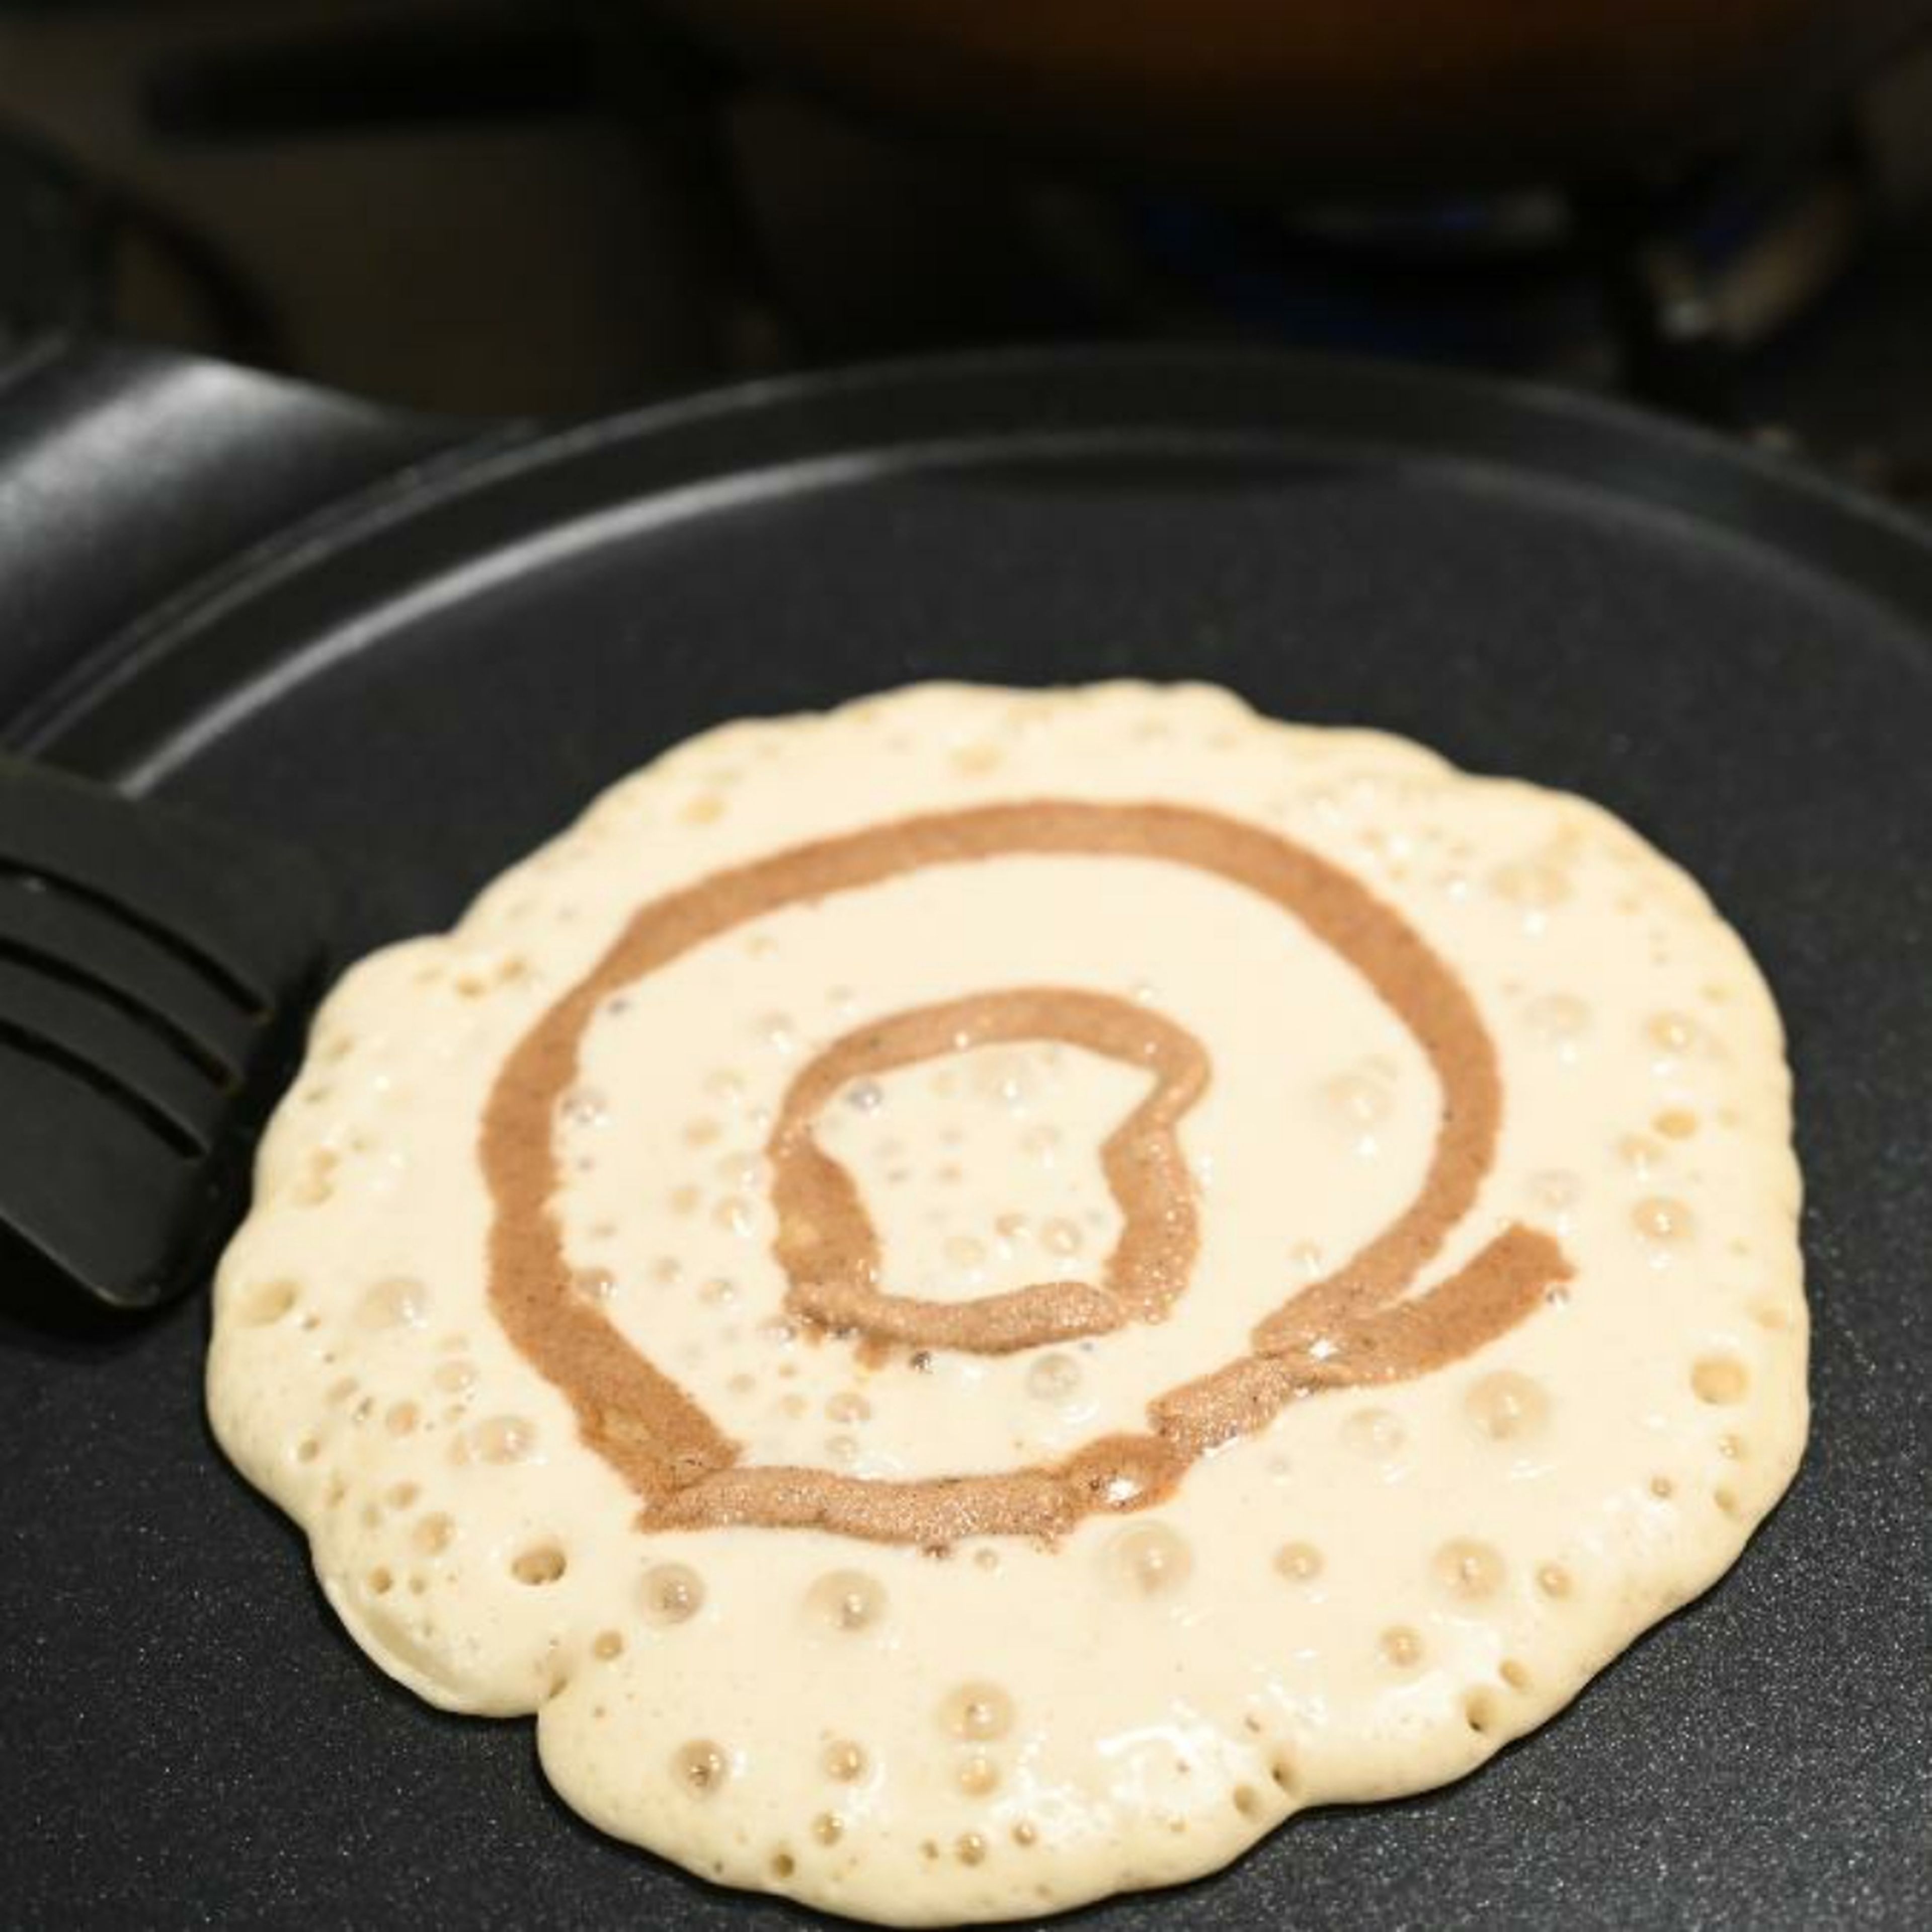 When small bubbles appear on the center of the pancake- after about 4 minutes flip the pancake.